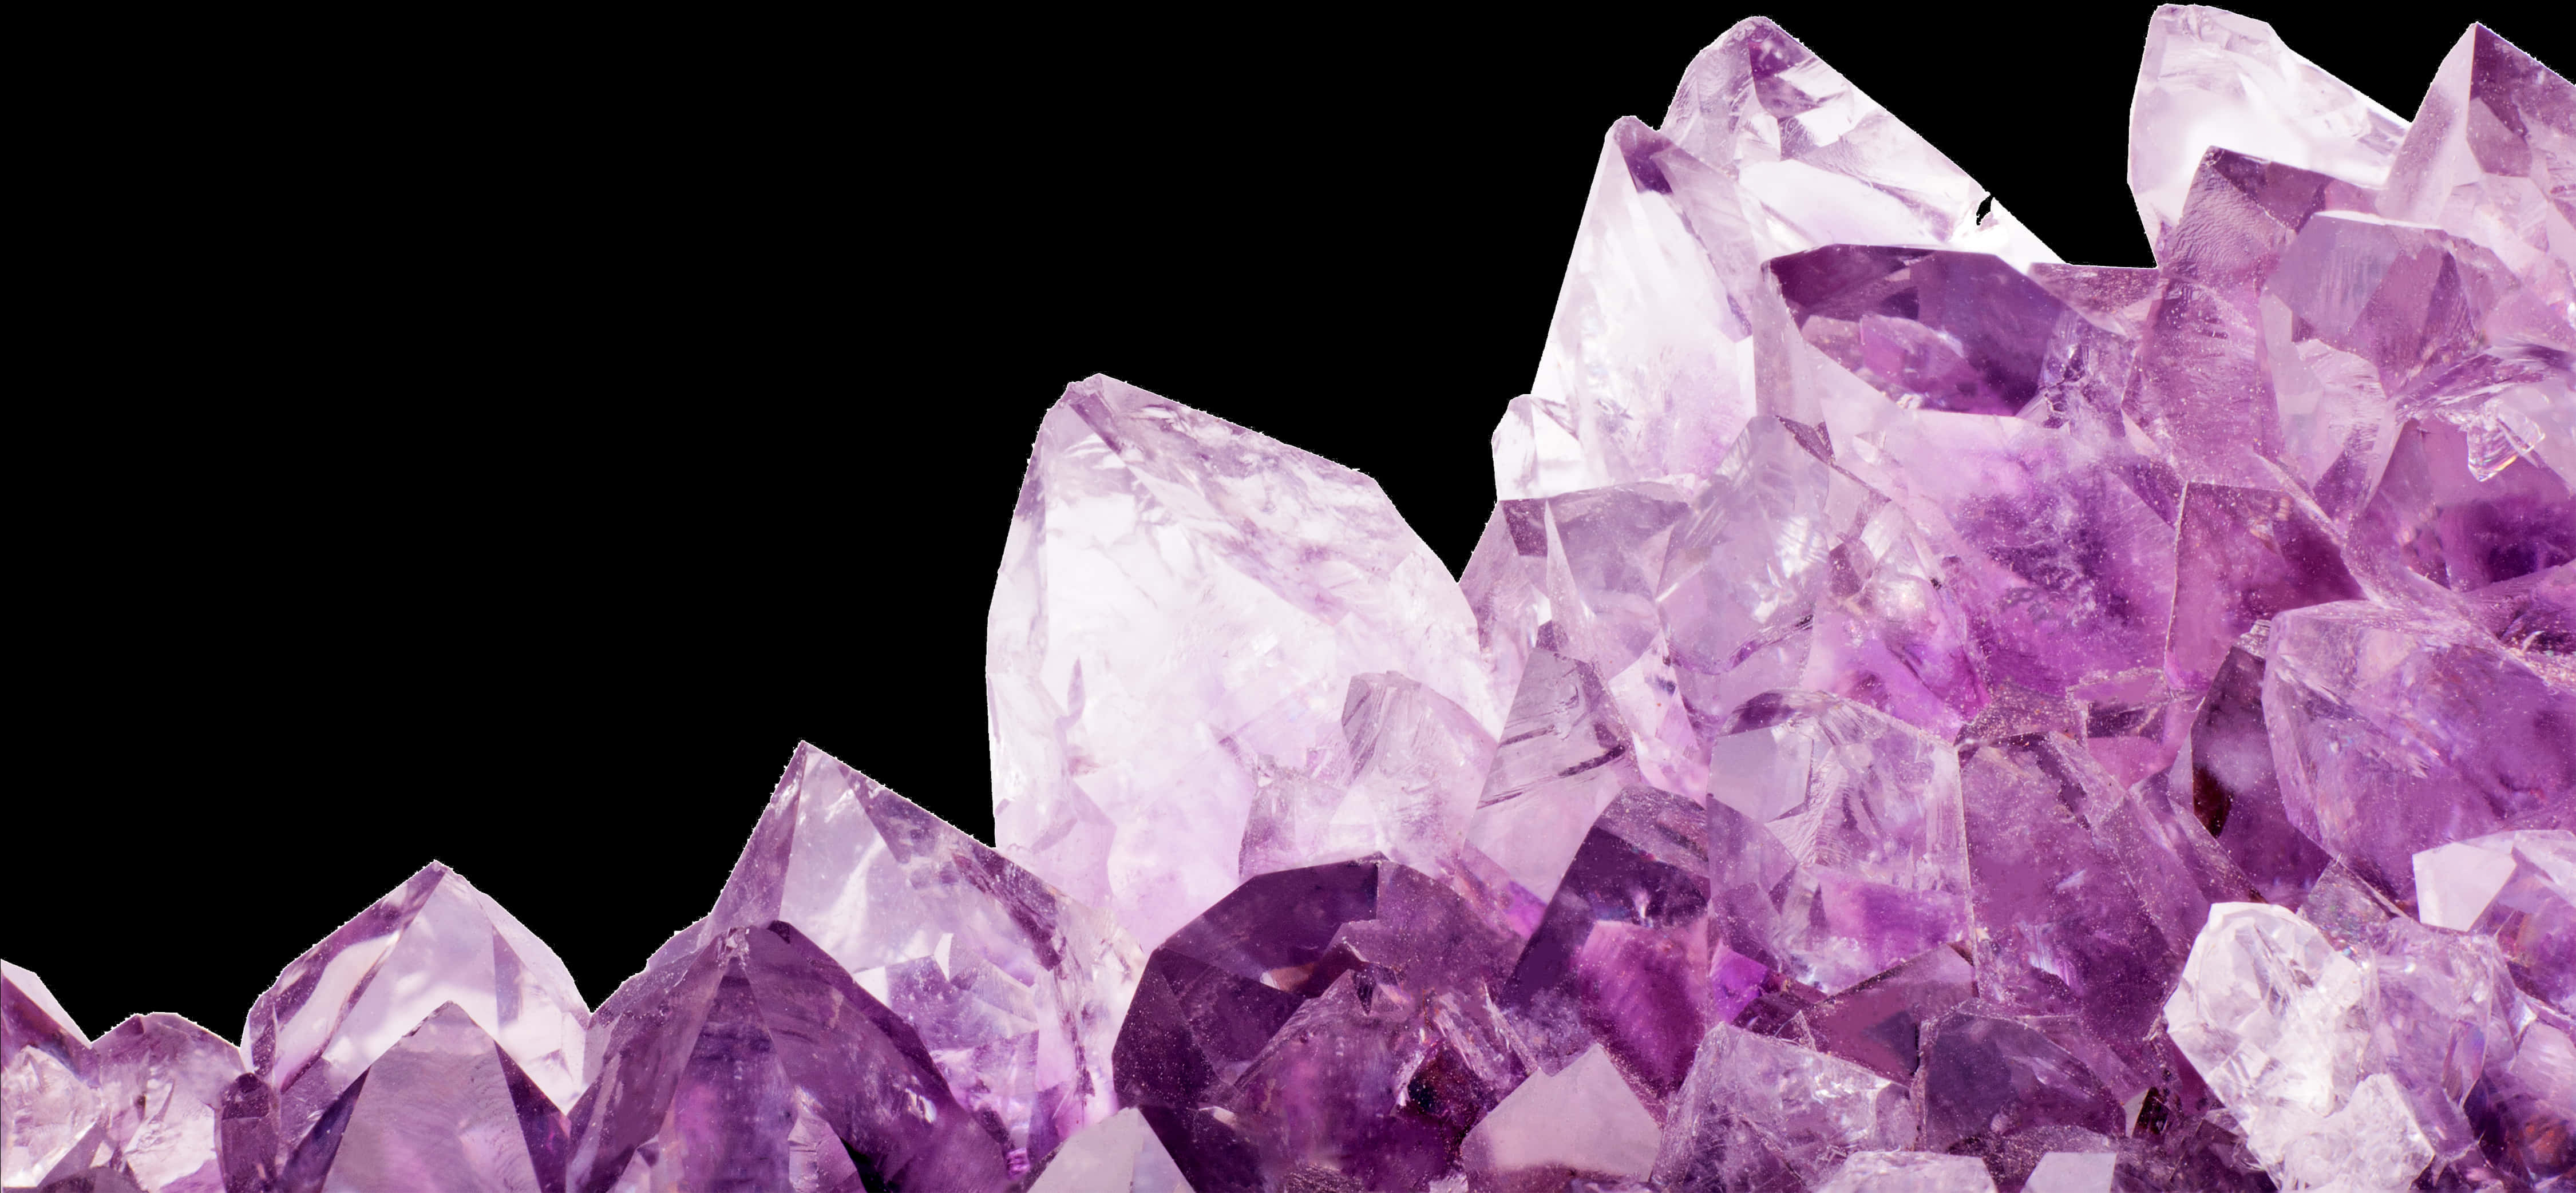 A Close-up Of A Purple Crystal